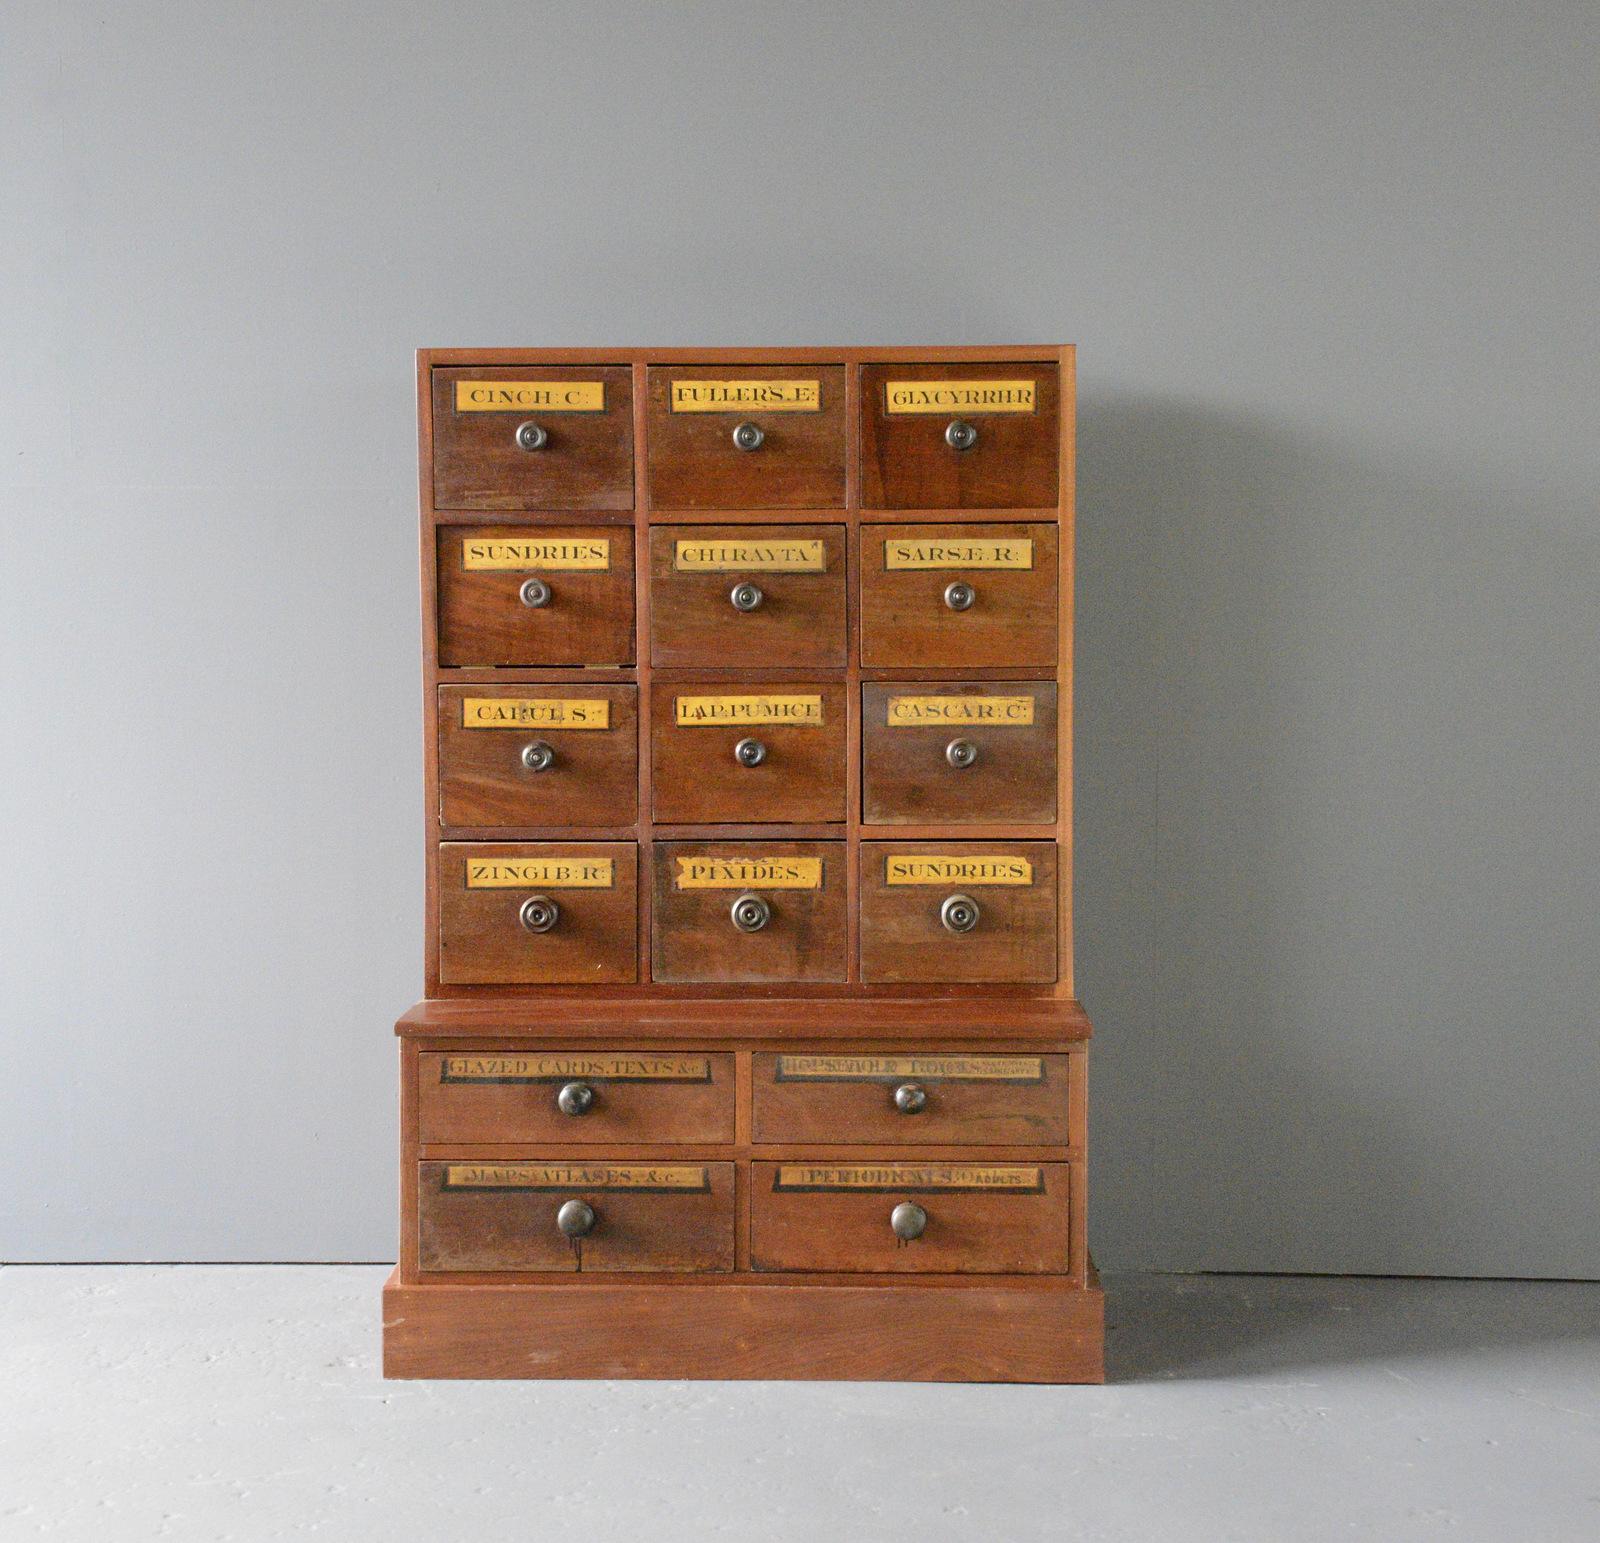 Early 20th century Apothecary Drawers circa 1910

- Mahogany drawers
- Wooden handles
- Original gold leaf labels 
- English ~ 1910
- 94cm wide x 53cm deep x 140m tall

Condition Report

Fully restored, some very minor cosmetic wear.